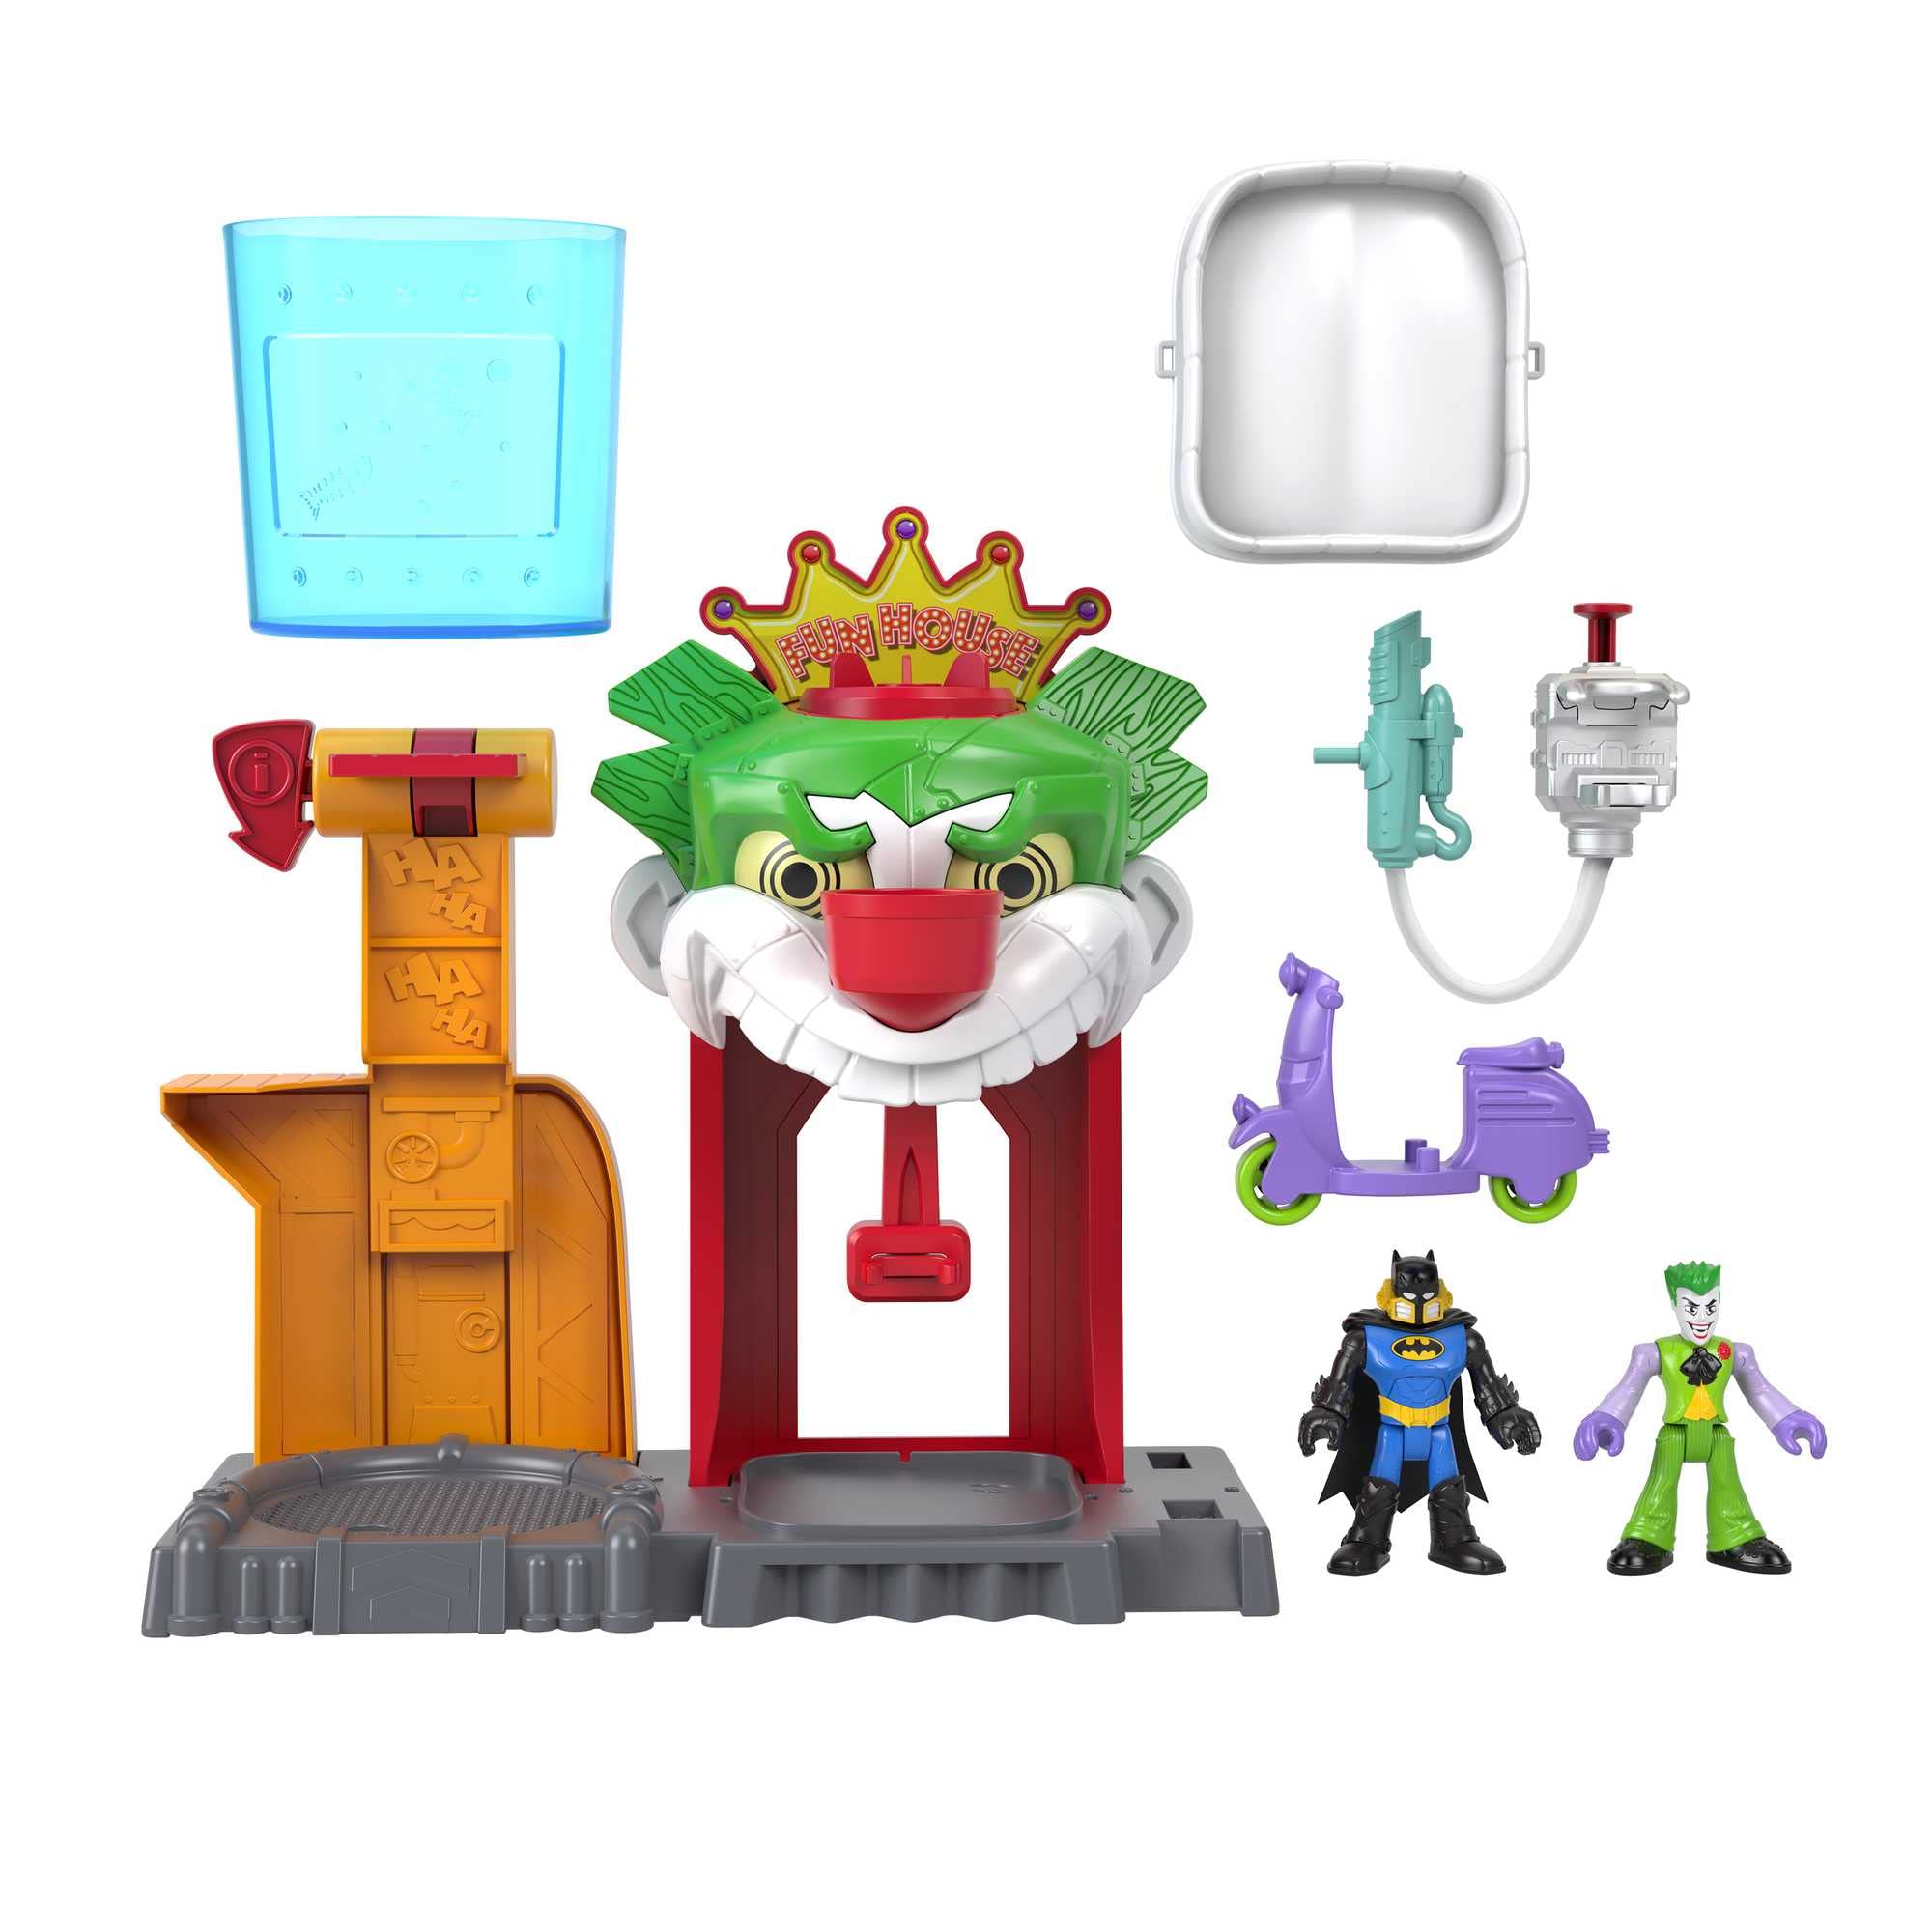 Fisher-Price Imaginext DC Super Friends Batman Toy The Joker Funhouse Playset Color Changers w/ 2 Figures & Accessories $8 + Free Shipping w/ Prime or on $35+